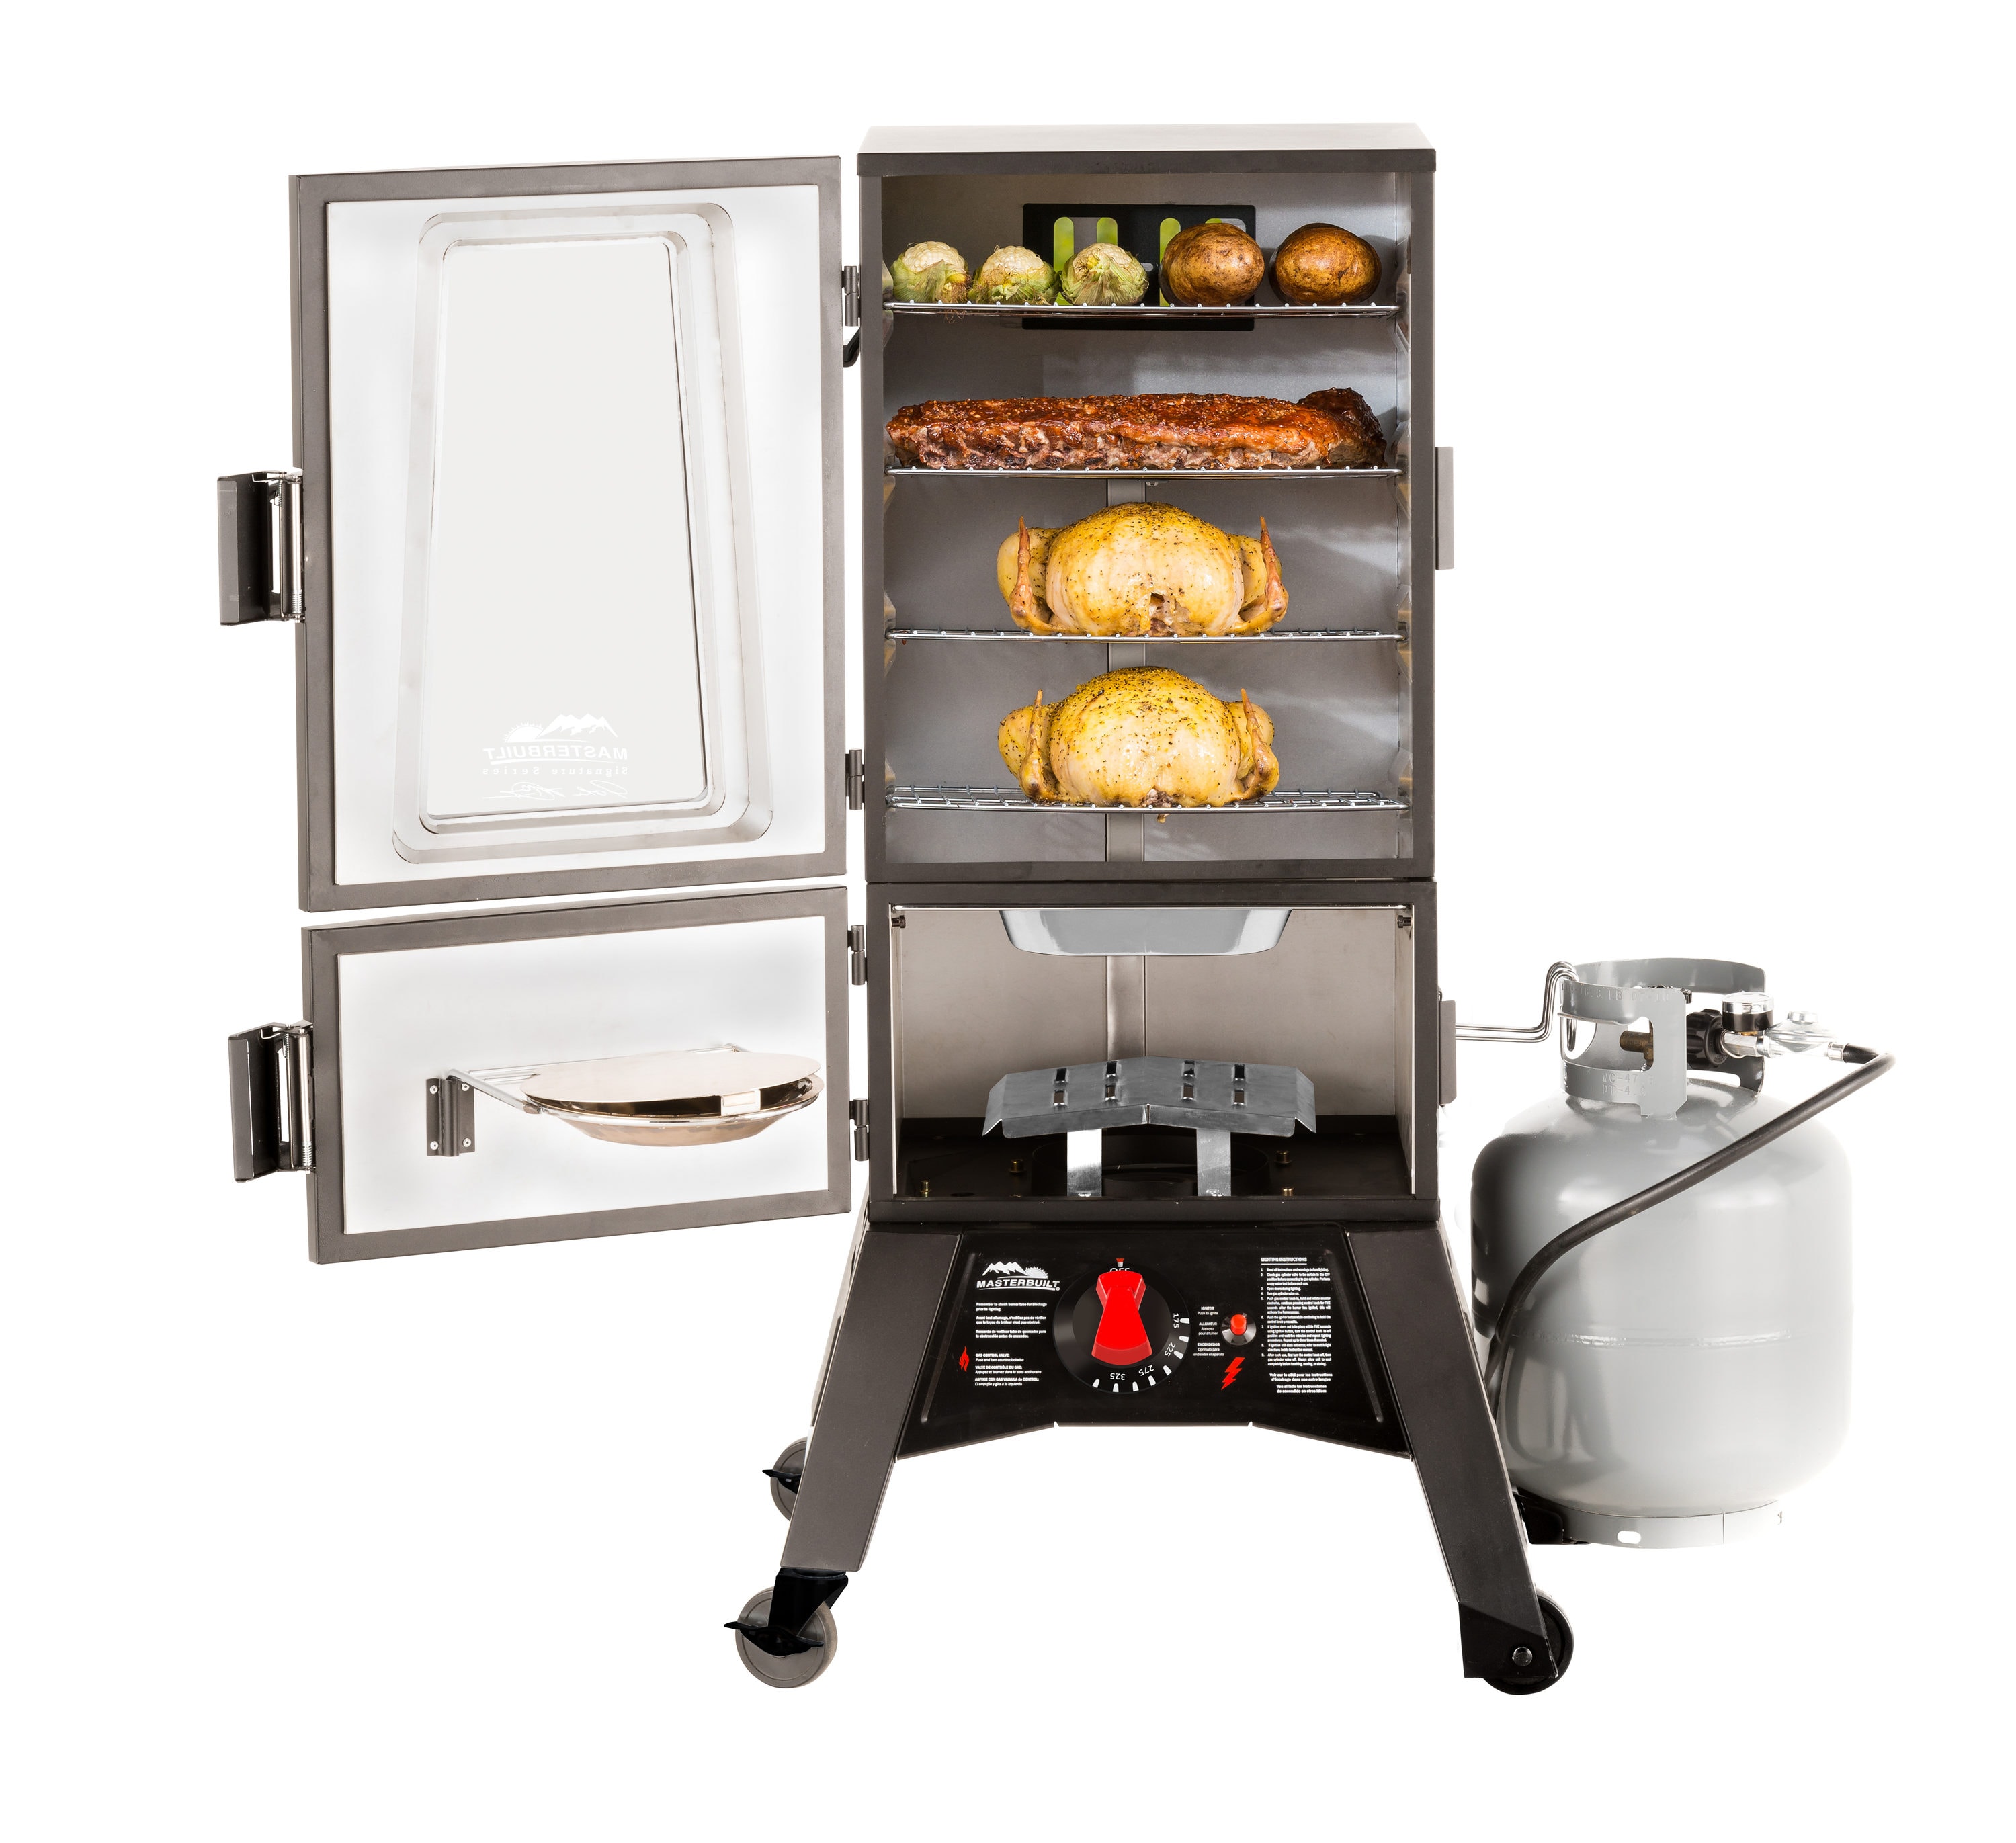 Masterbuilt 40 in. ThermoTemp XL Propane Smoker with Window in